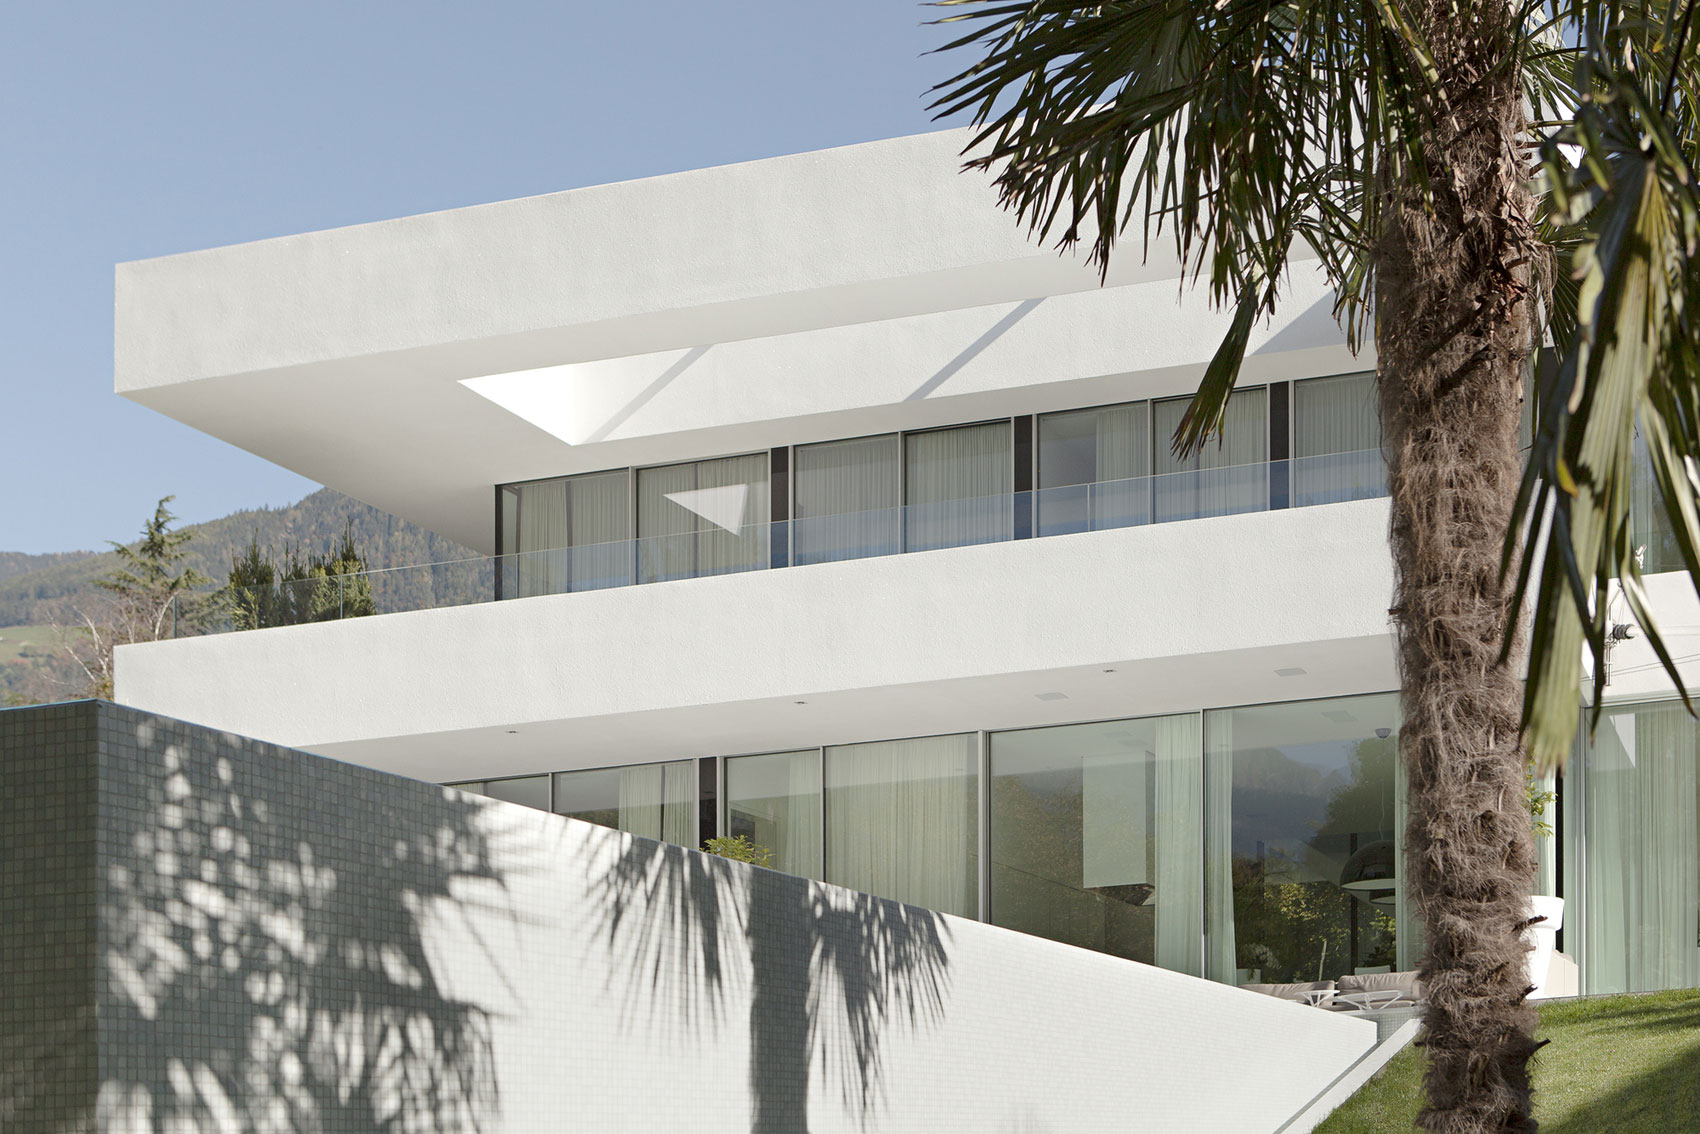 white-exterior-modern-glass-house-design-with-glass-railings-for-balcony